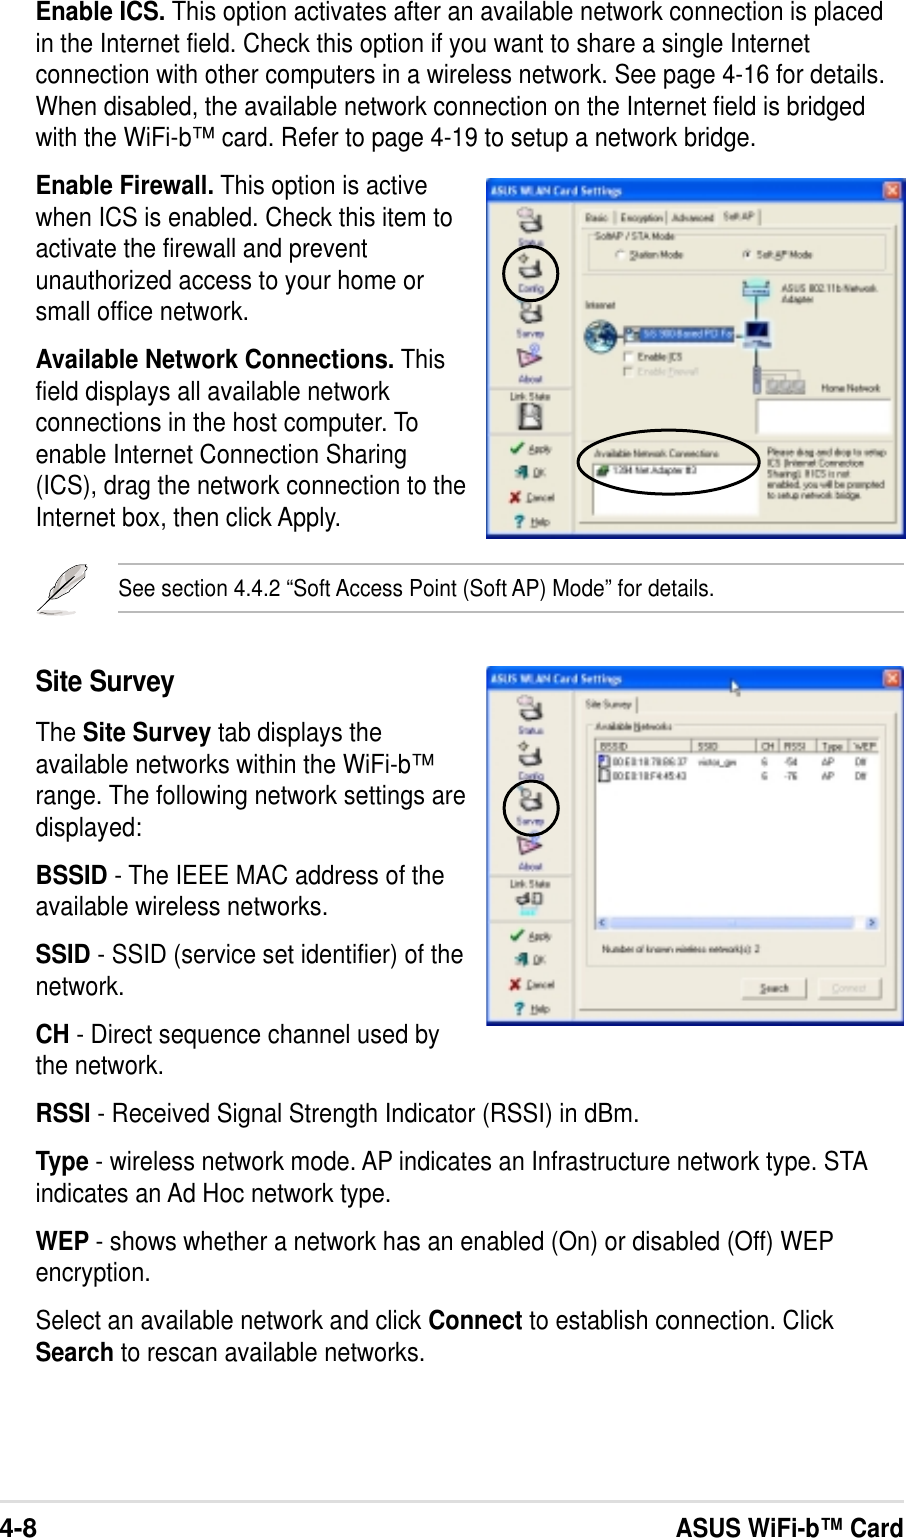 4-8ASUS WiFi-b™ CardSite SurveyThe Site Survey tab displays theavailable networks within the WiFi-b™range. The following network settings aredisplayed:BSSID - The IEEE MAC address of theavailable wireless networks.SSID - SSID (service set identifier) of thenetwork.CH - Direct sequence channel used bythe network.RSSI - Received Signal Strength Indicator (RSSI) in dBm.Type - wireless network mode. AP indicates an Infrastructure network type. STAindicates an Ad Hoc network type.WEP - shows whether a network has an enabled (On) or disabled (Off) WEPencryption.Select an available network and click Connect to establish connection. ClickSearch to rescan available networks.Enable ICS. This option activates after an available network connection is placedin the Internet field. Check this option if you want to share a single Internetconnection with other computers in a wireless network. See page 4-16 for details.When disabled, the available network connection on the Internet field is bridgedwith the WiFi-b™ card. Refer to page 4-19 to setup a network bridge.Enable Firewall. This option is activewhen ICS is enabled. Check this item toactivate the firewall and preventunauthorized access to your home orsmall office network.Available Network Connections. Thisfield displays all available networkconnections in the host computer. Toenable Internet Connection Sharing(ICS), drag the network connection to theInternet box, then click Apply.See section 4.4.2 “Soft Access Point (Soft AP) Mode” for details.